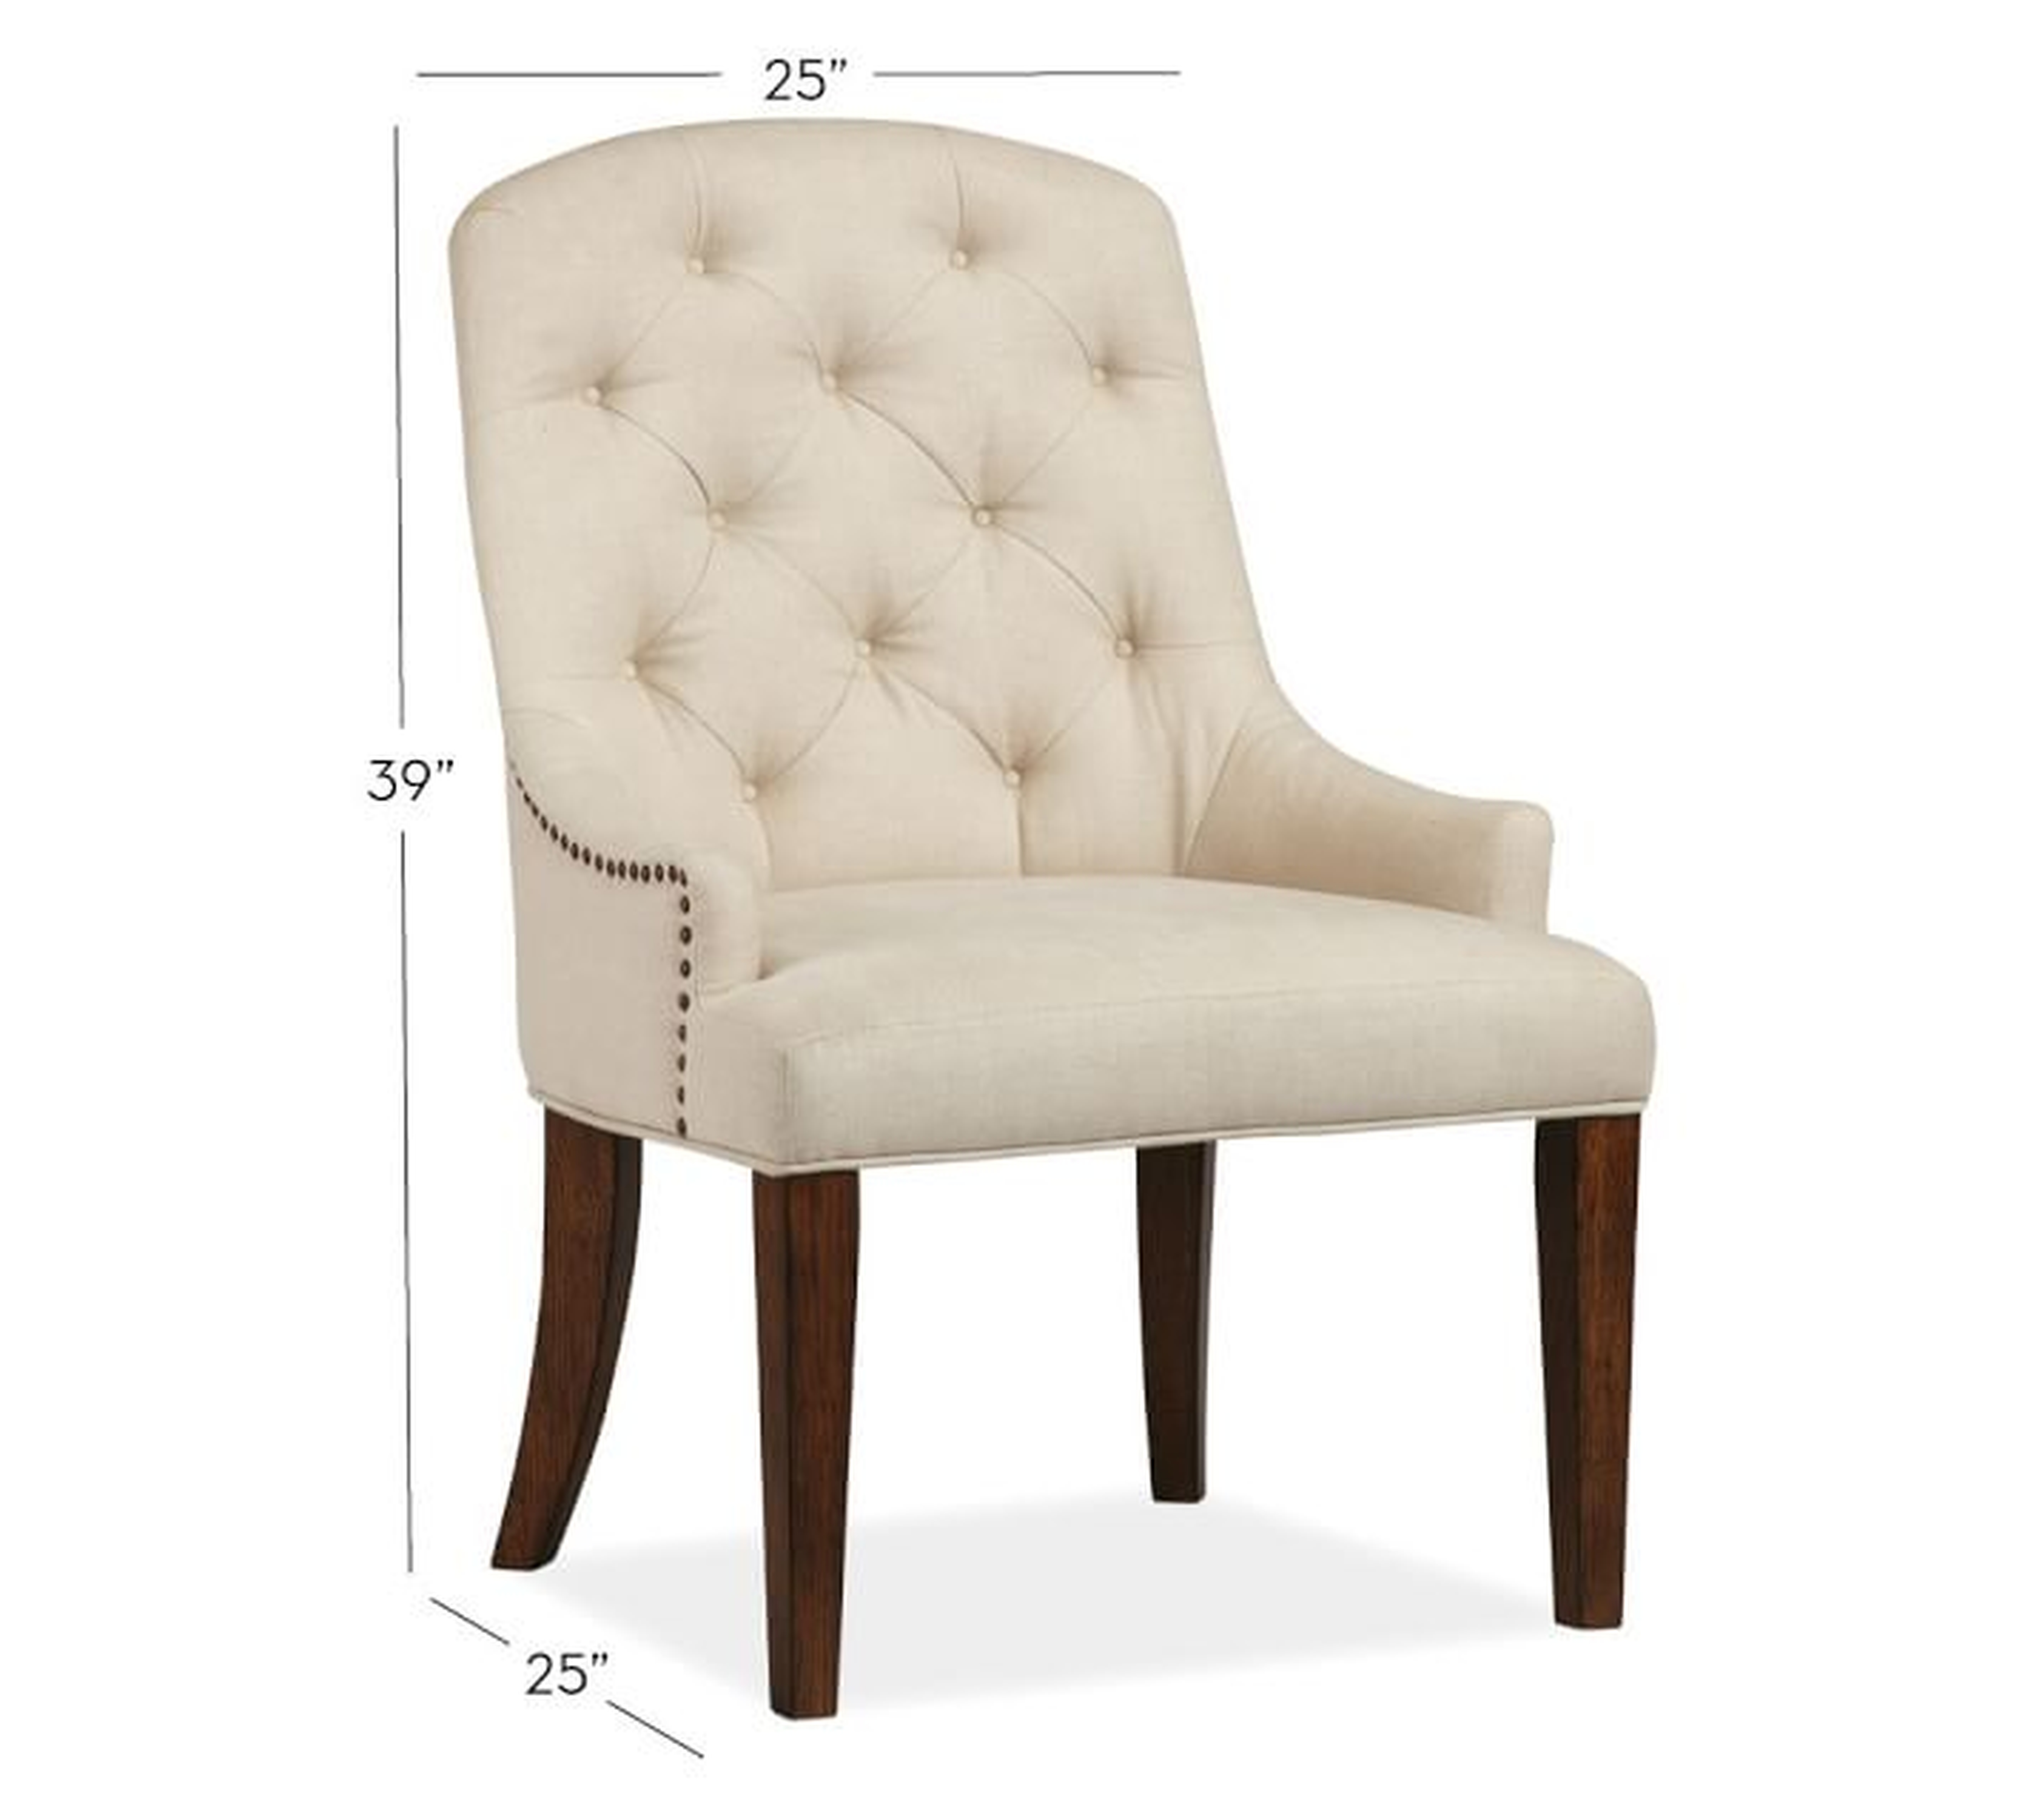 Lorraine Tufted Upholstered Armchair - Linen, Natural - Pottery Barn